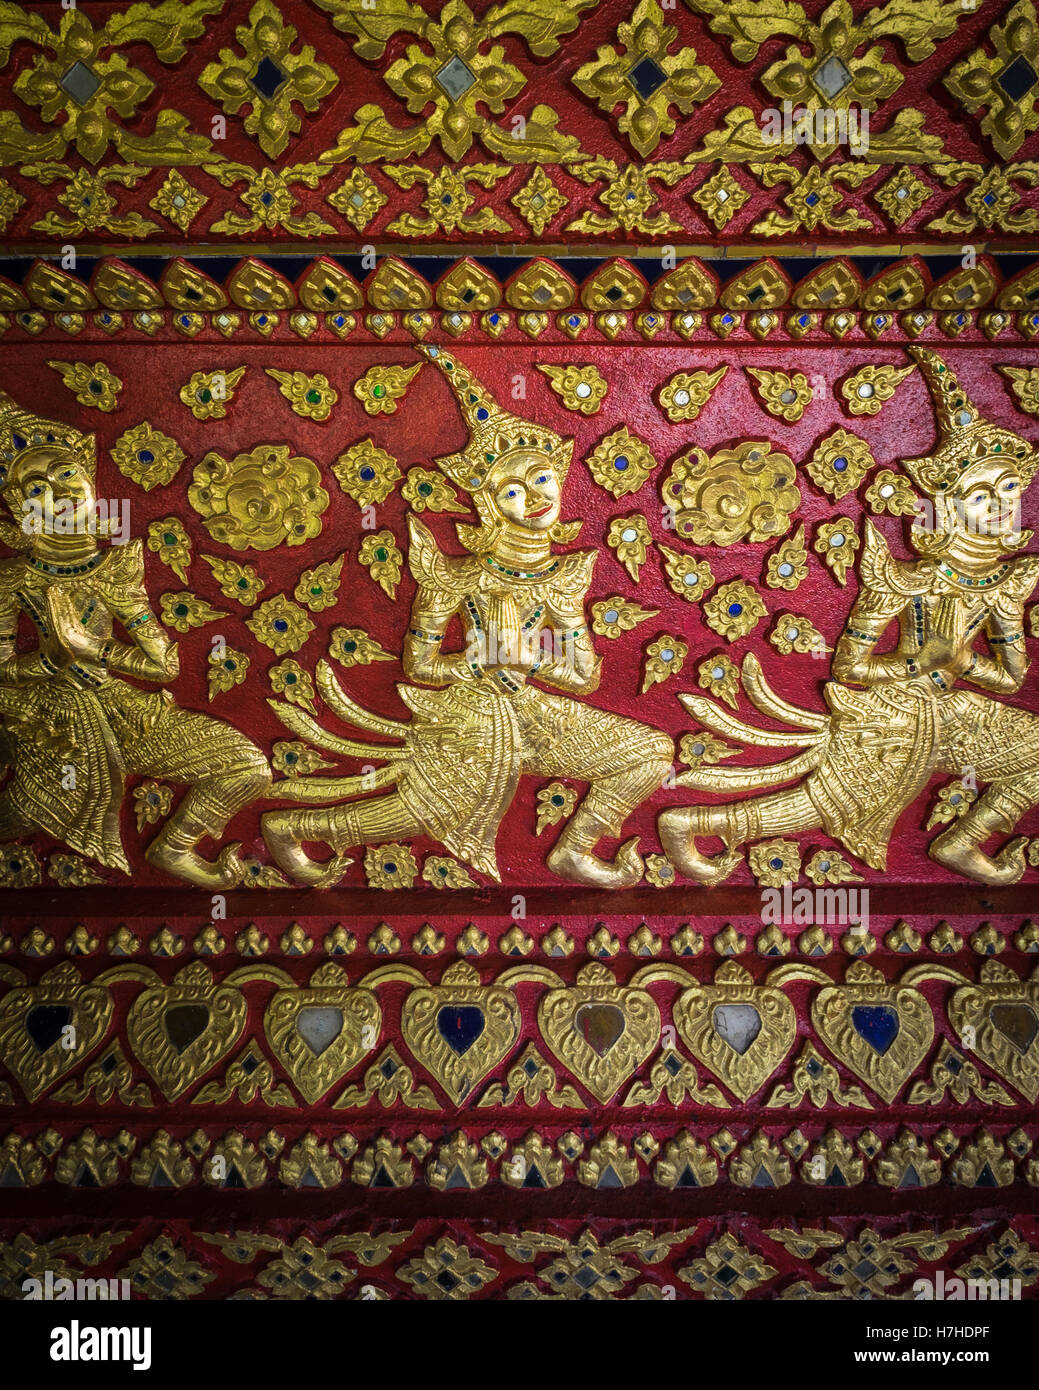 Detailed painted artwork in the buddhist temple, Wat Suan Dok in Chiang Mai, northern Thailand. Stock Photo